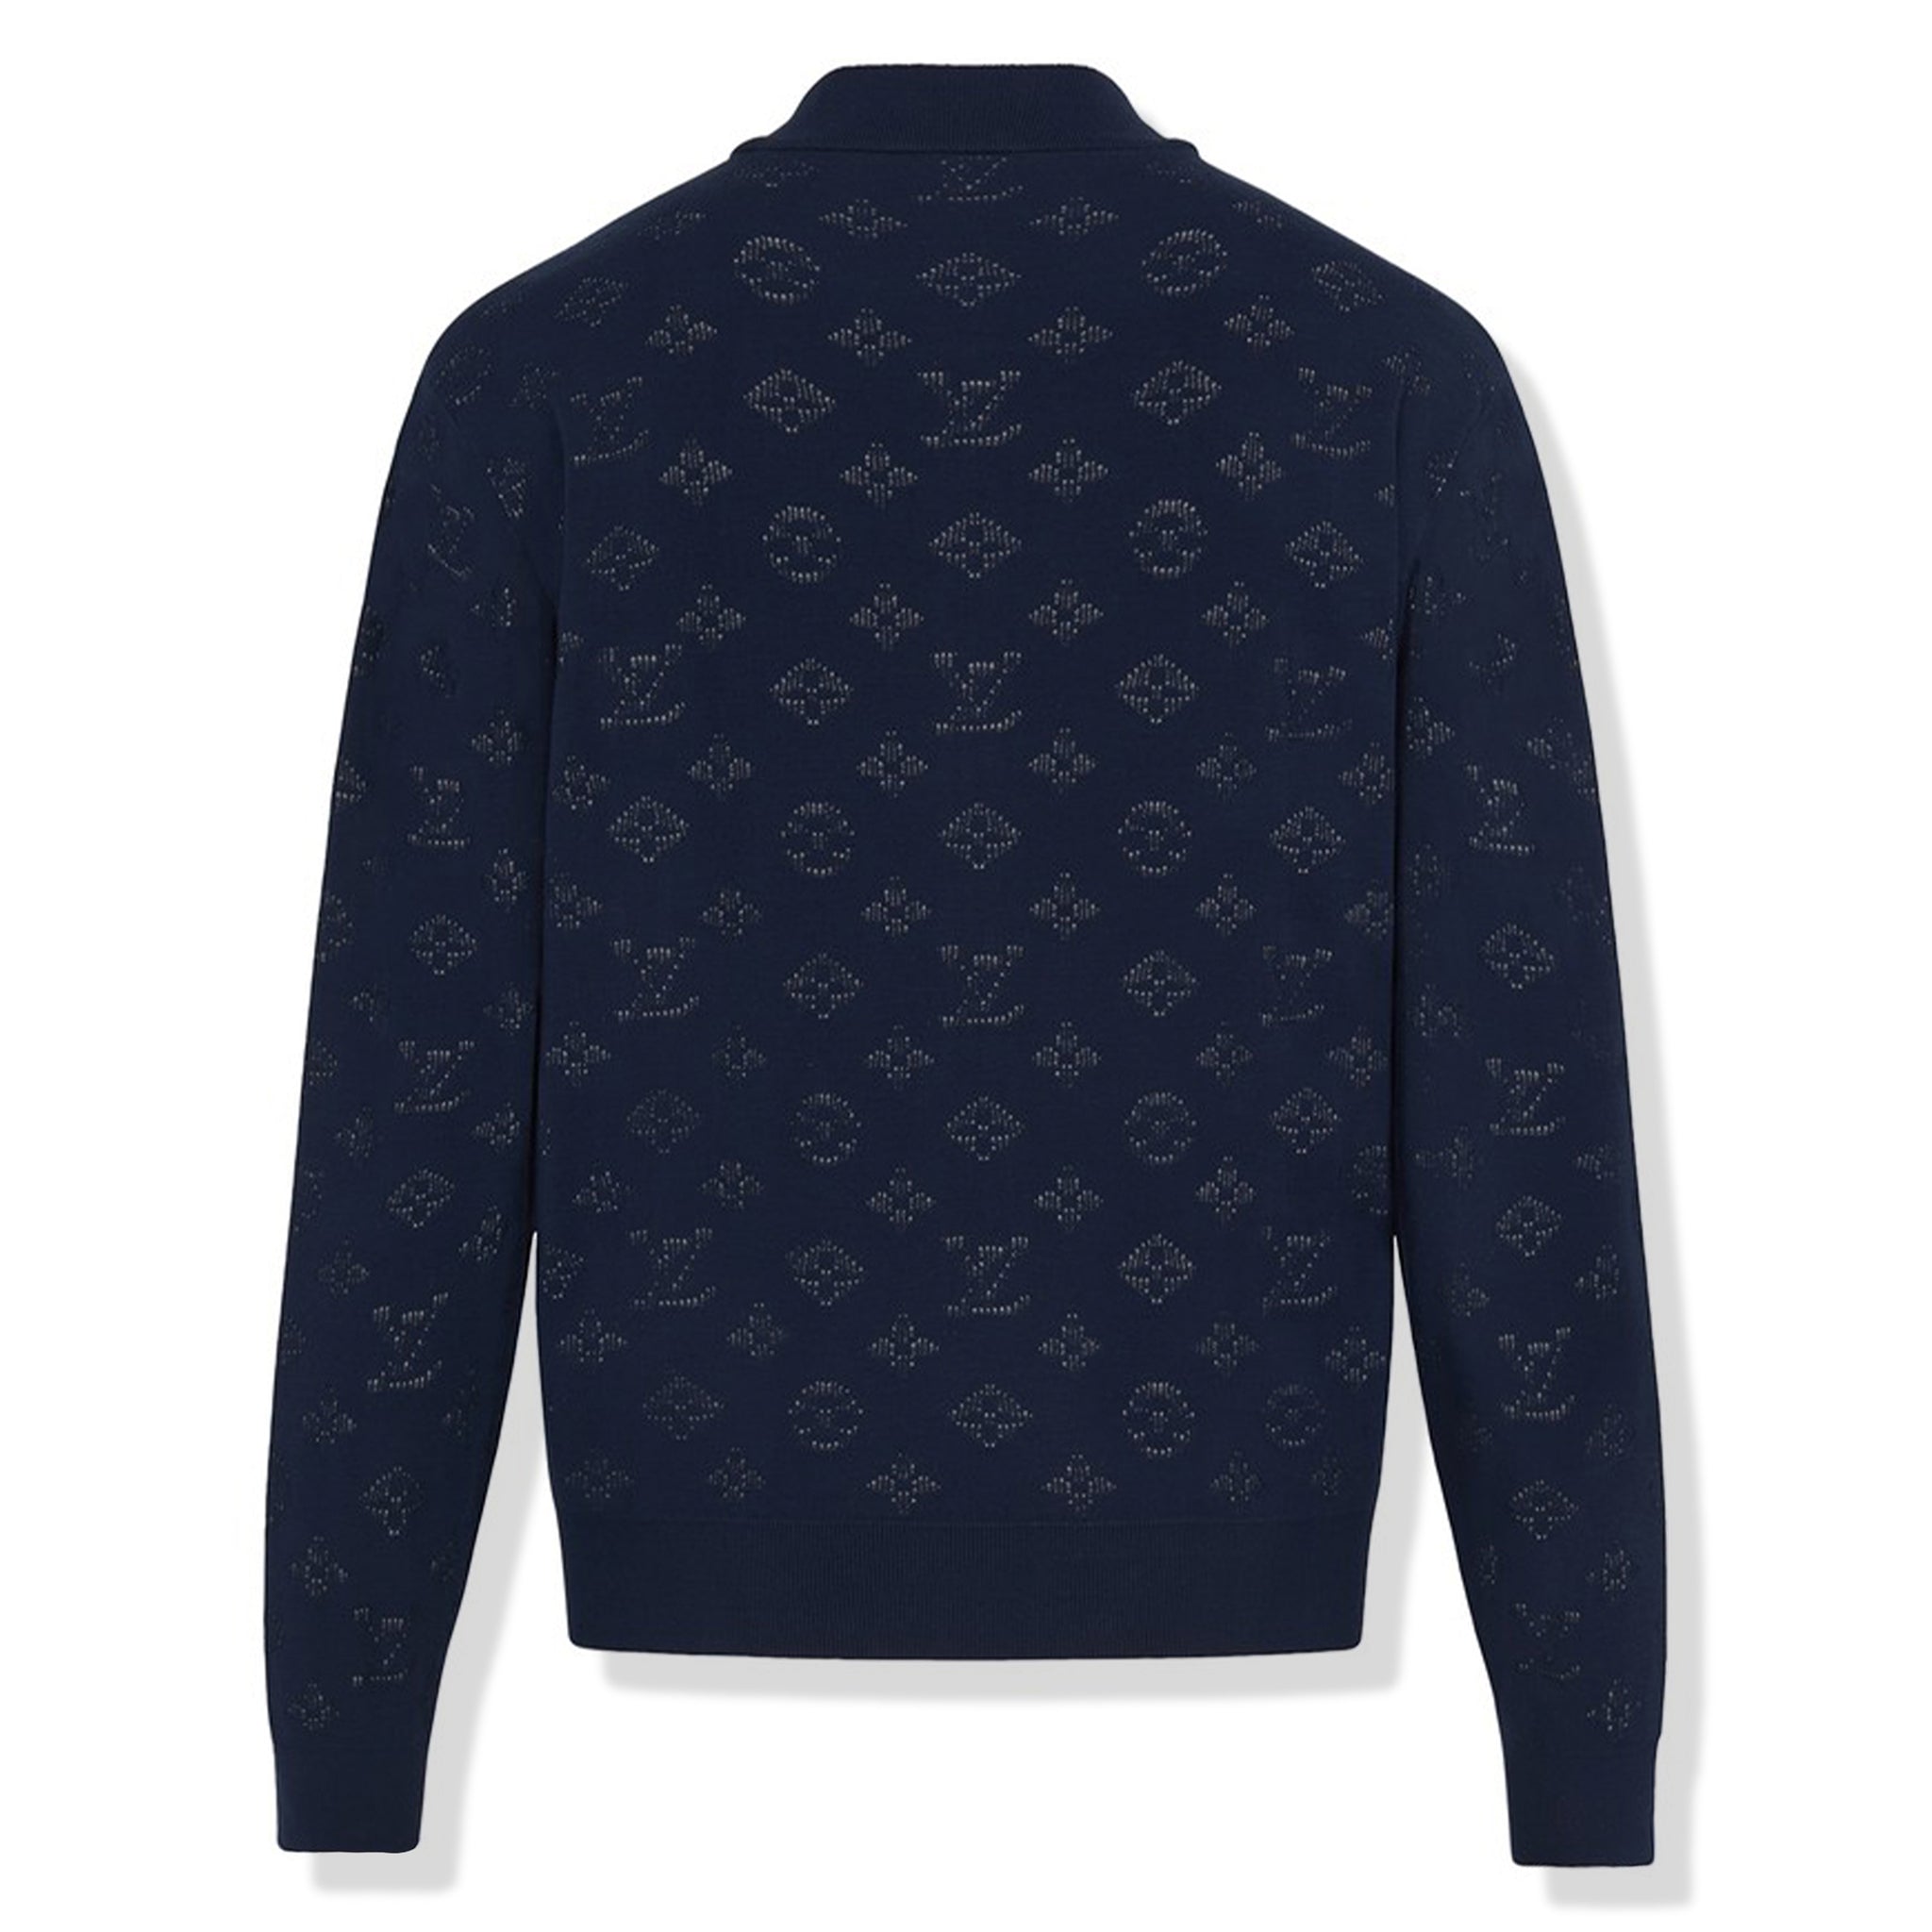 Louis Vuitton Authenticated Knitwear